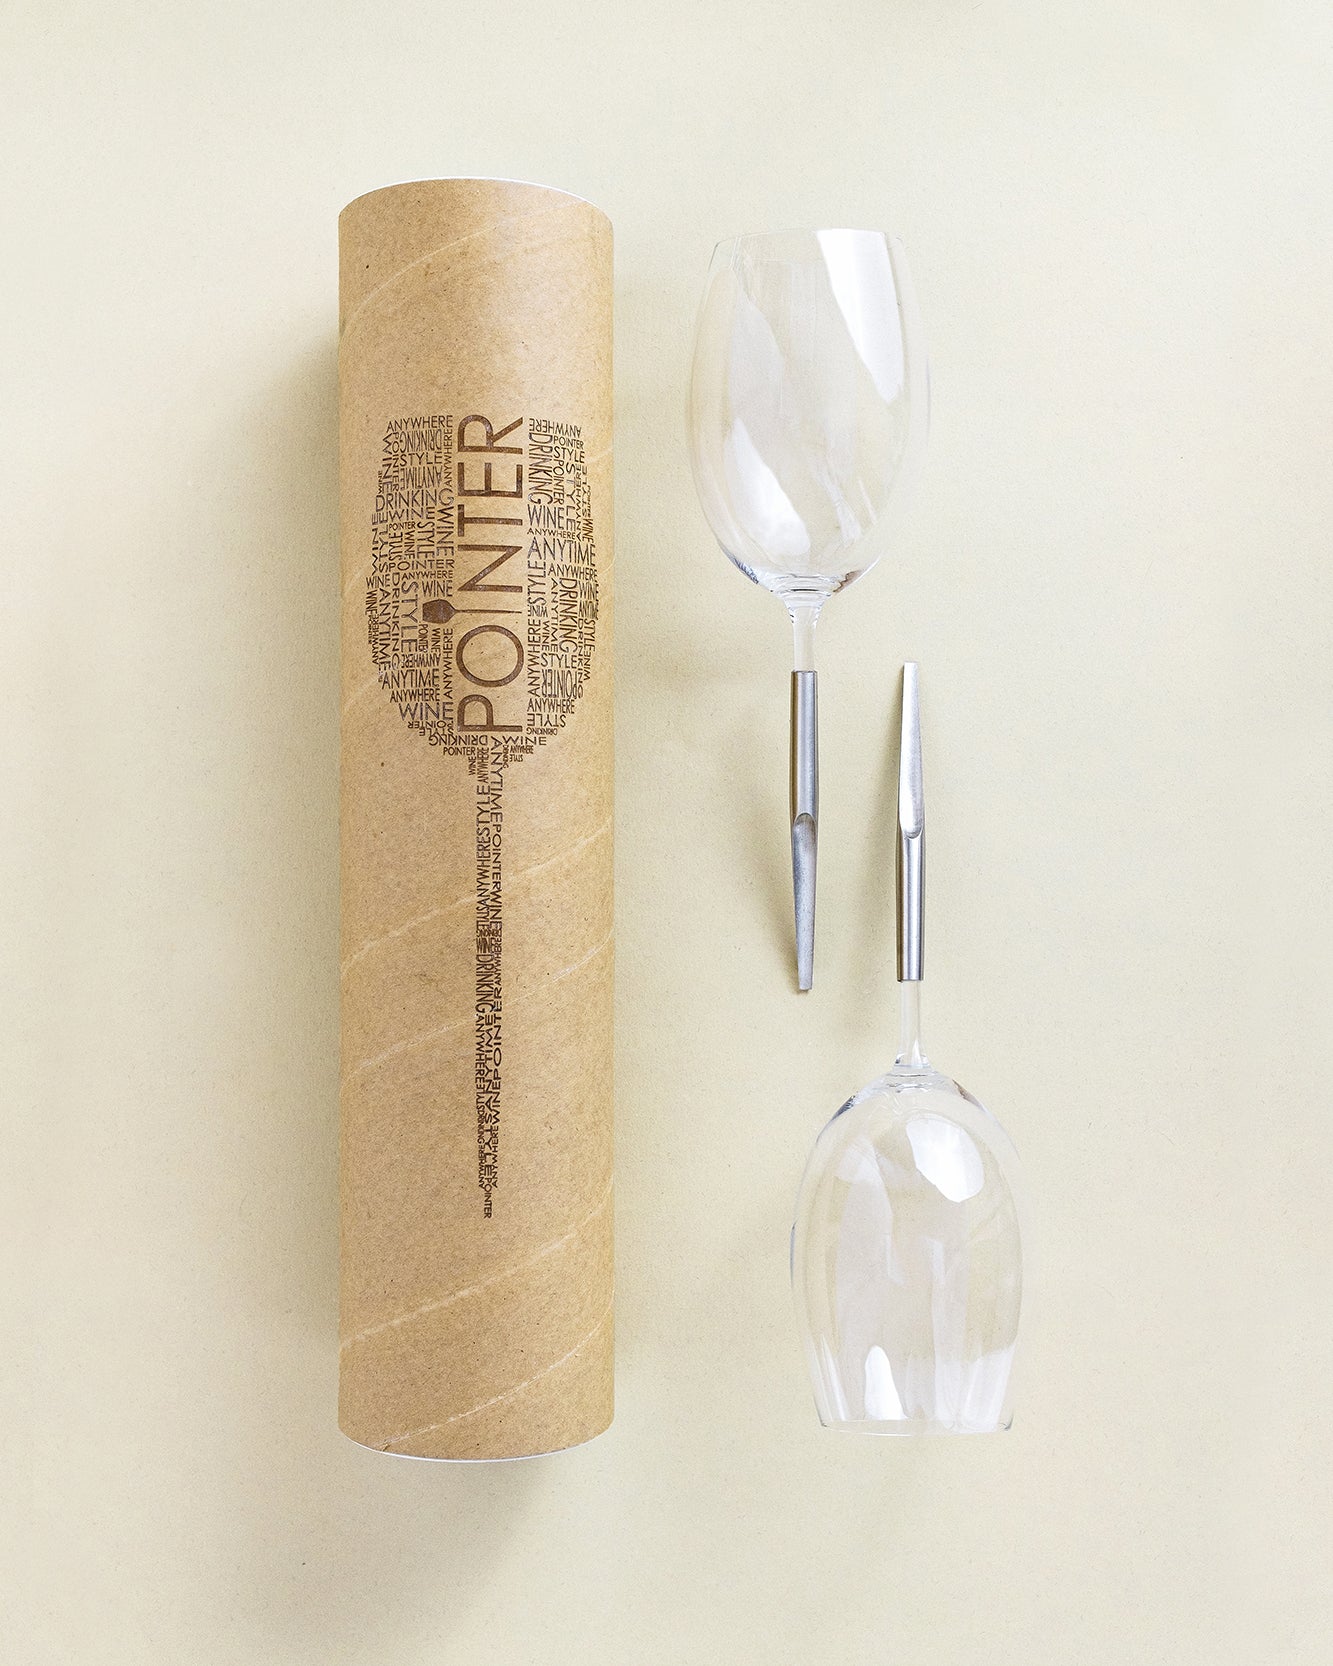 2 picnic wine glasses for red wine laying next to each other and next to cardboard packing tube